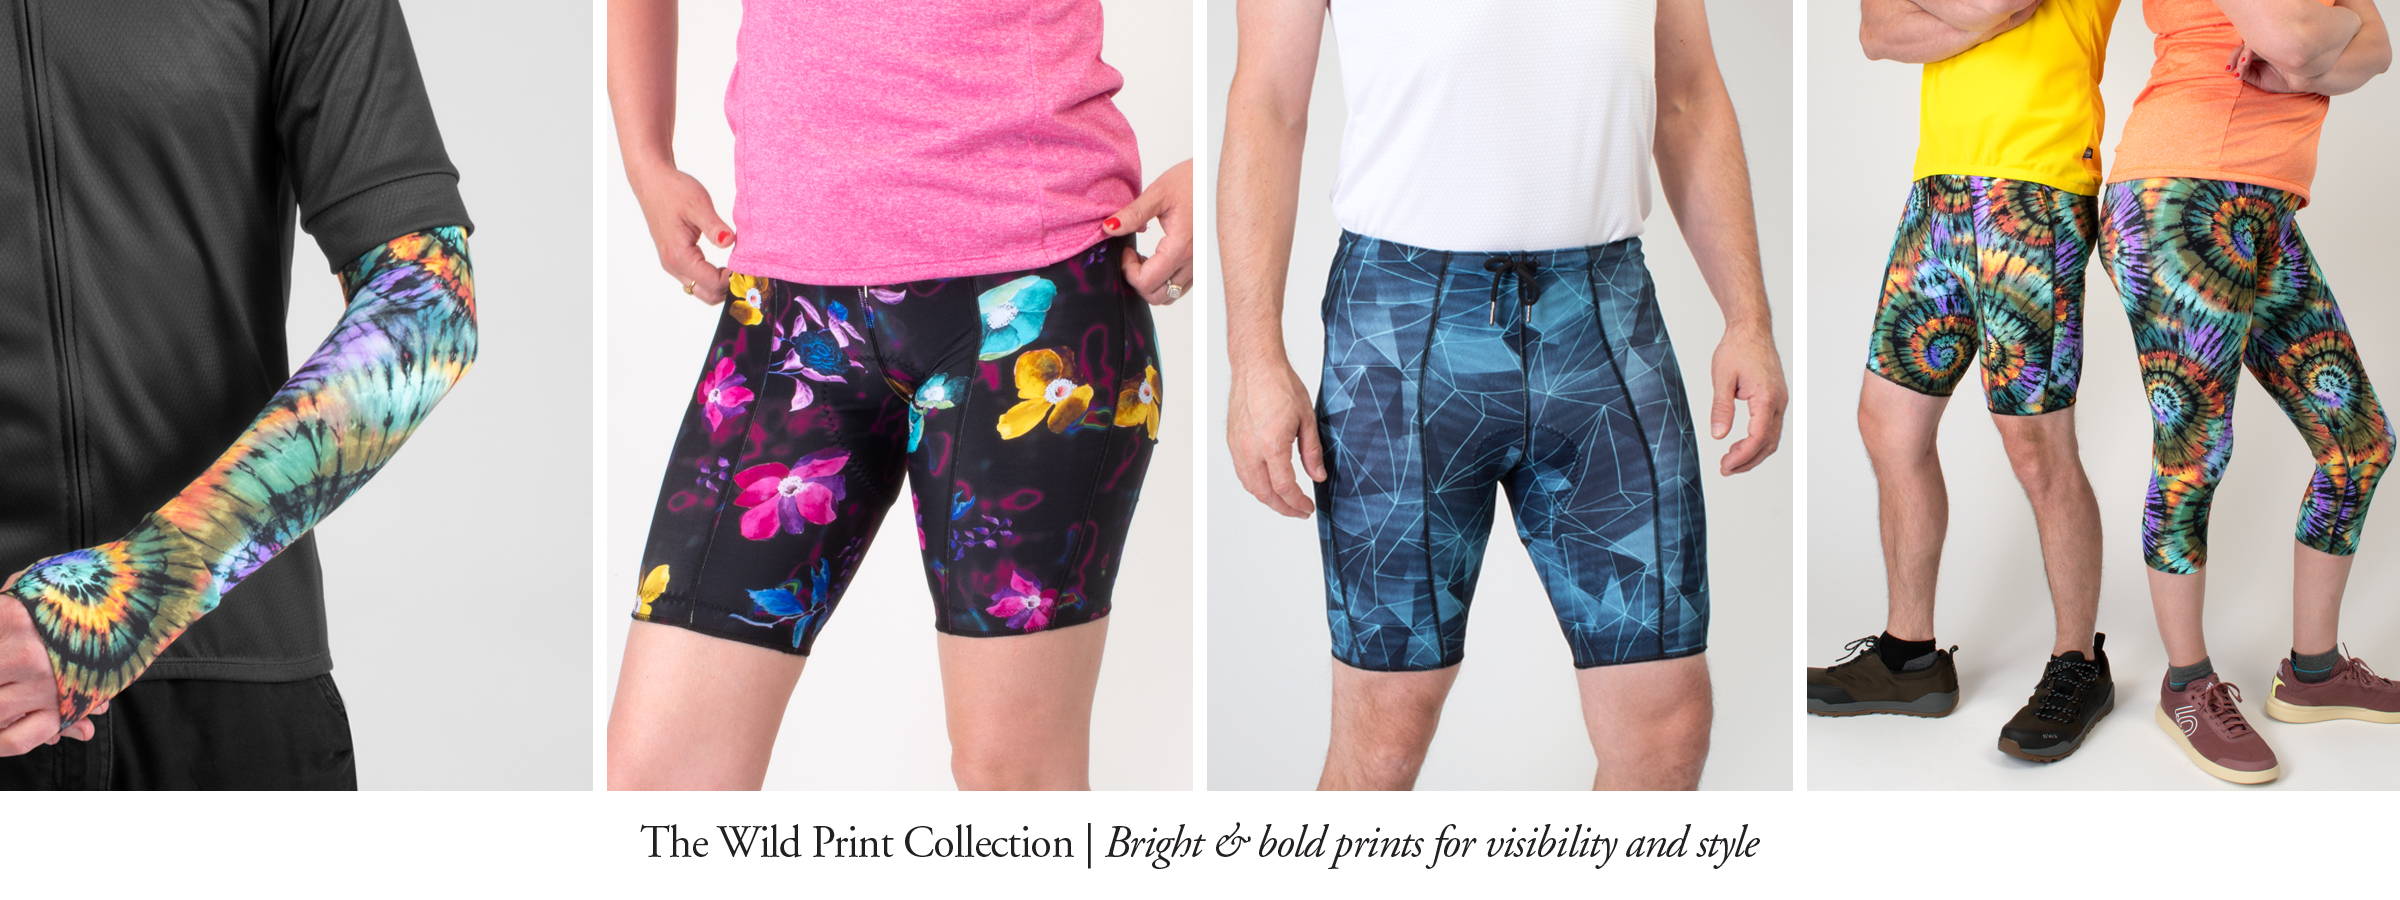 Wild Print cycling Apparel Collection